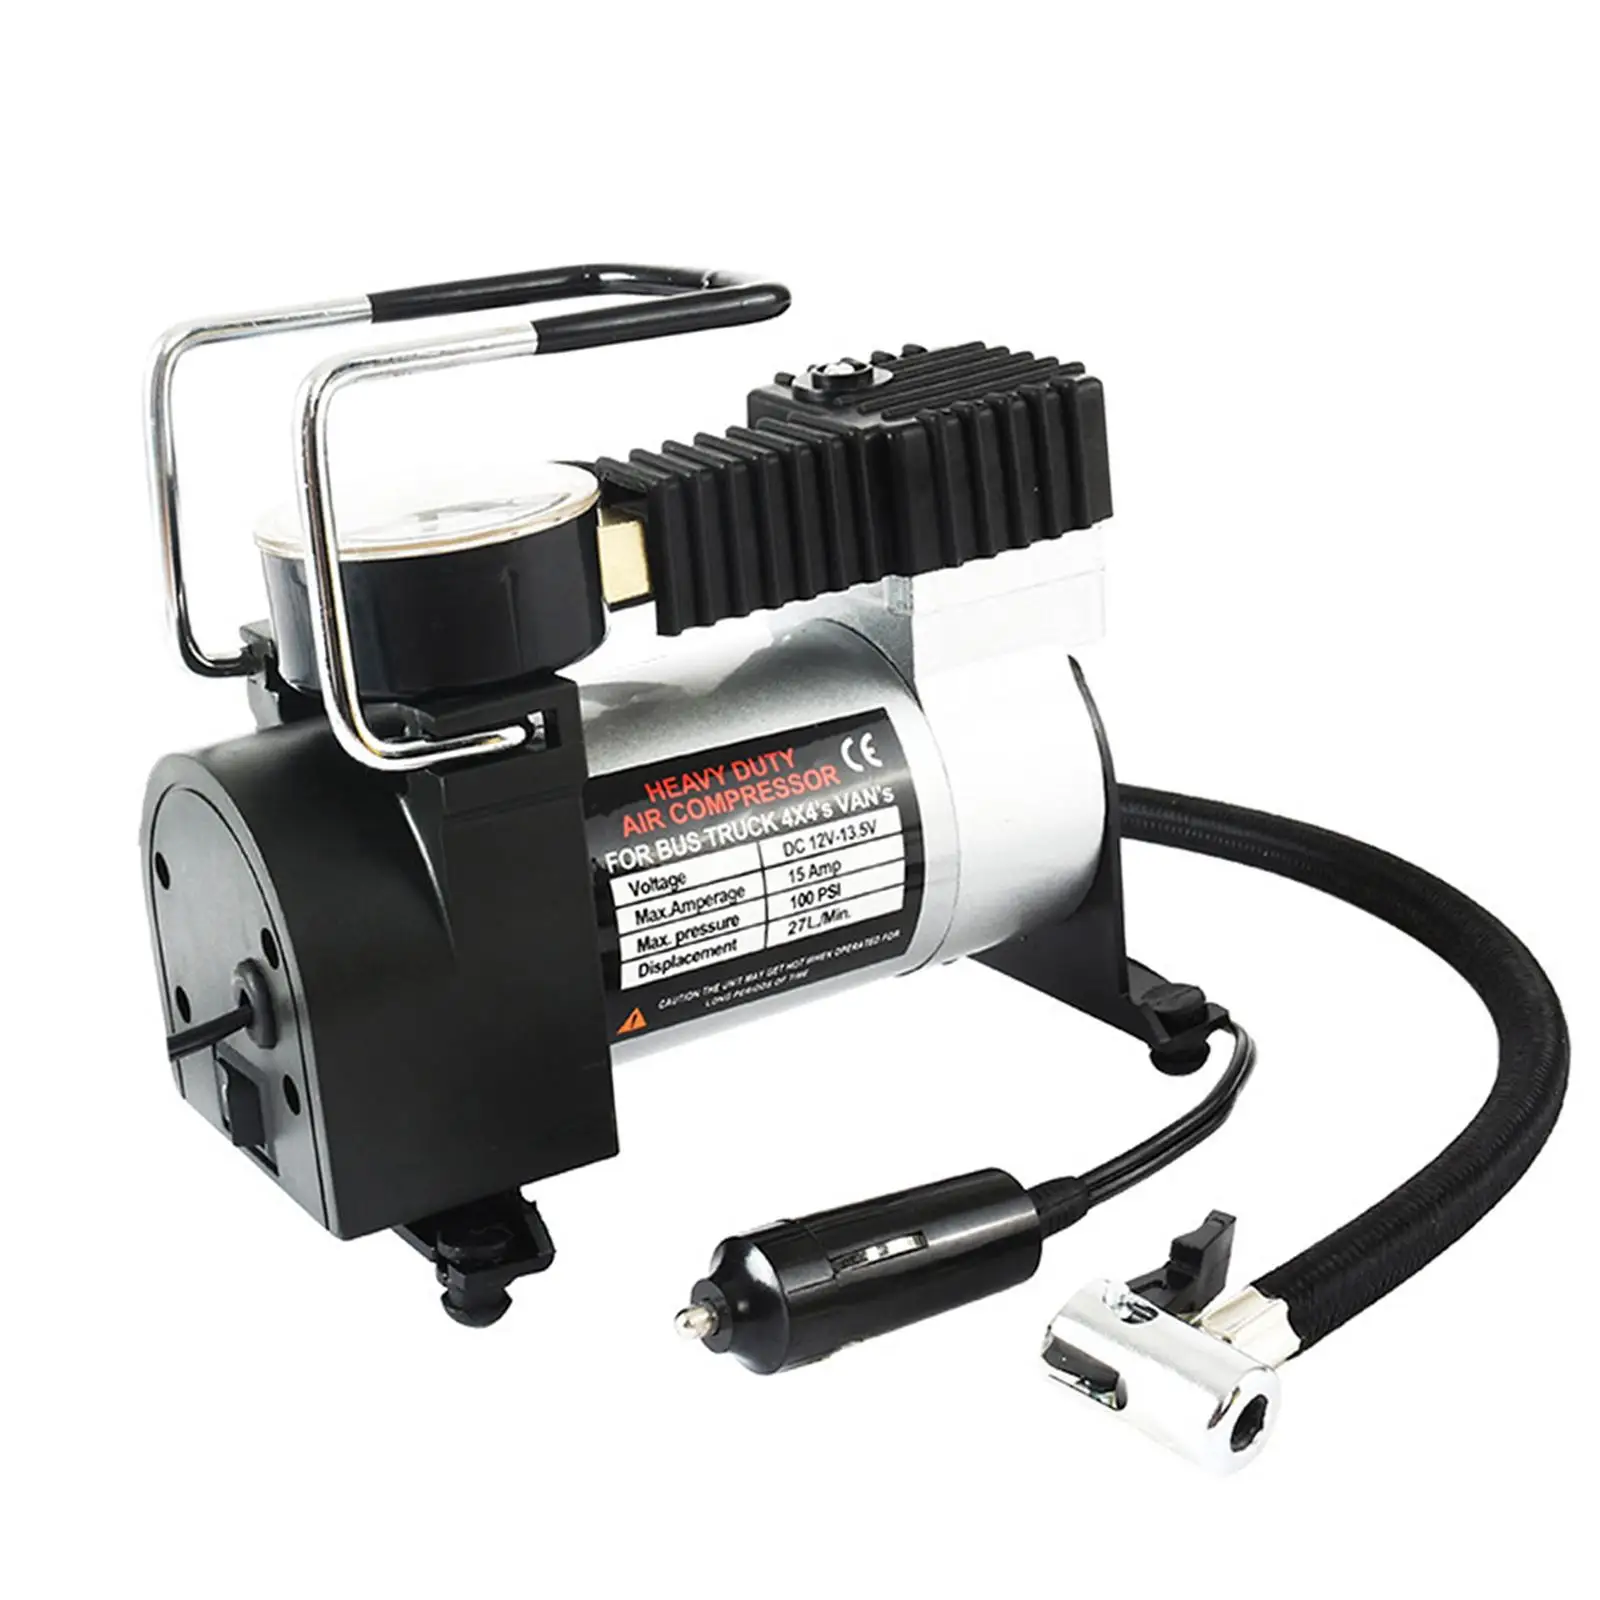 Tire Inflator Handheld Charging Pump Electric Air Compressor for SUV